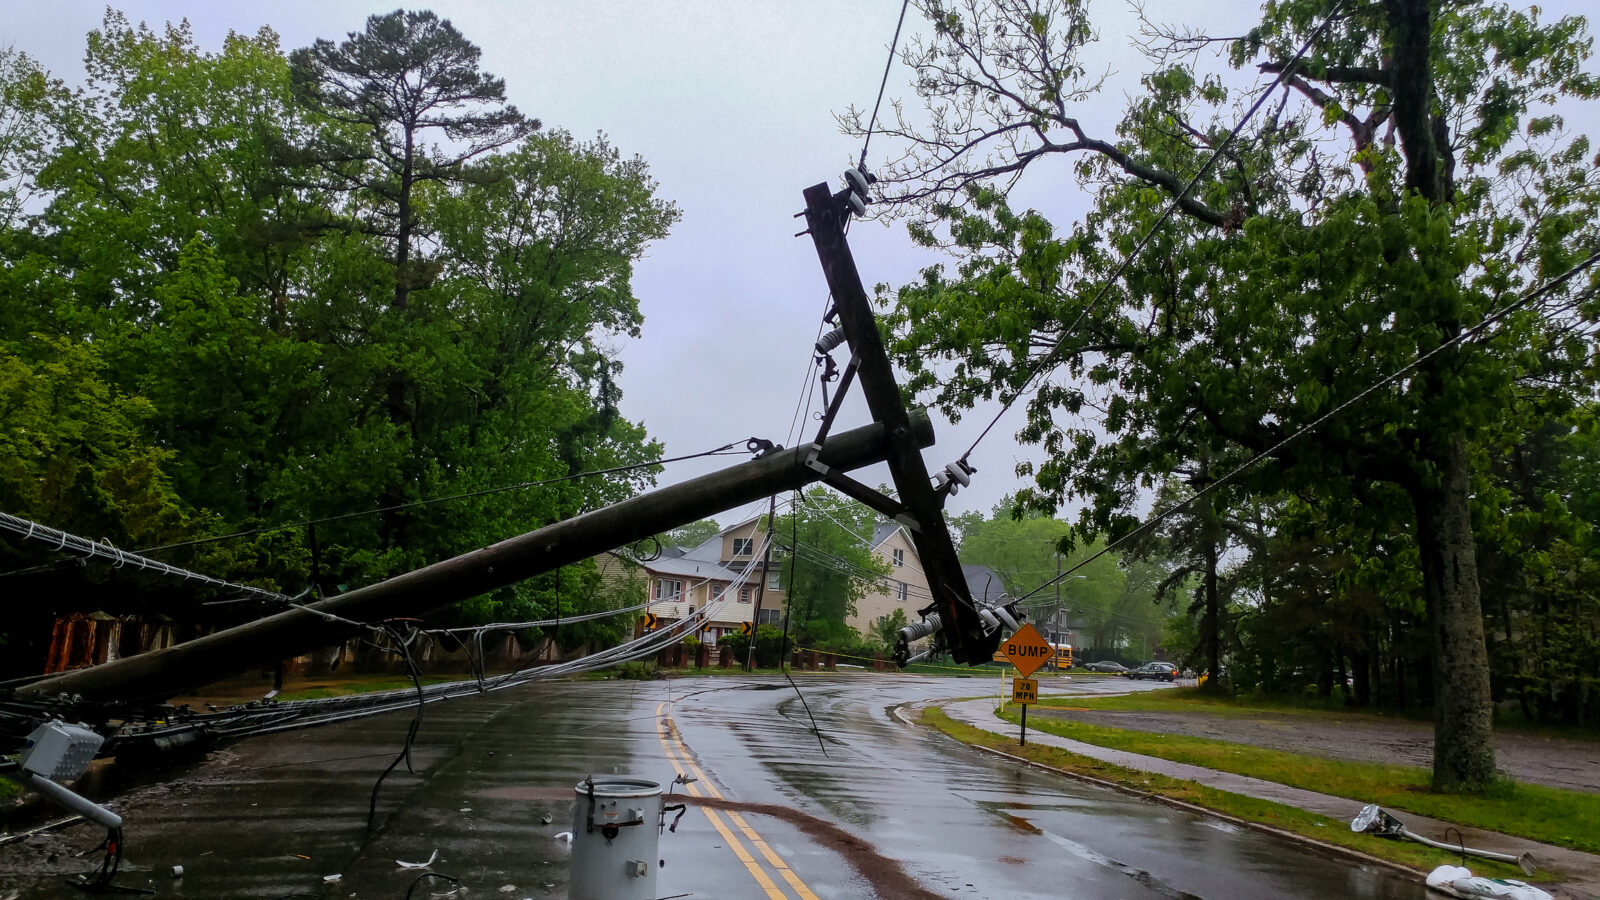 A picture of a downed utility pole on a flooded road during a storm, to illustrate an LCA post on creating a weather emergency plan.